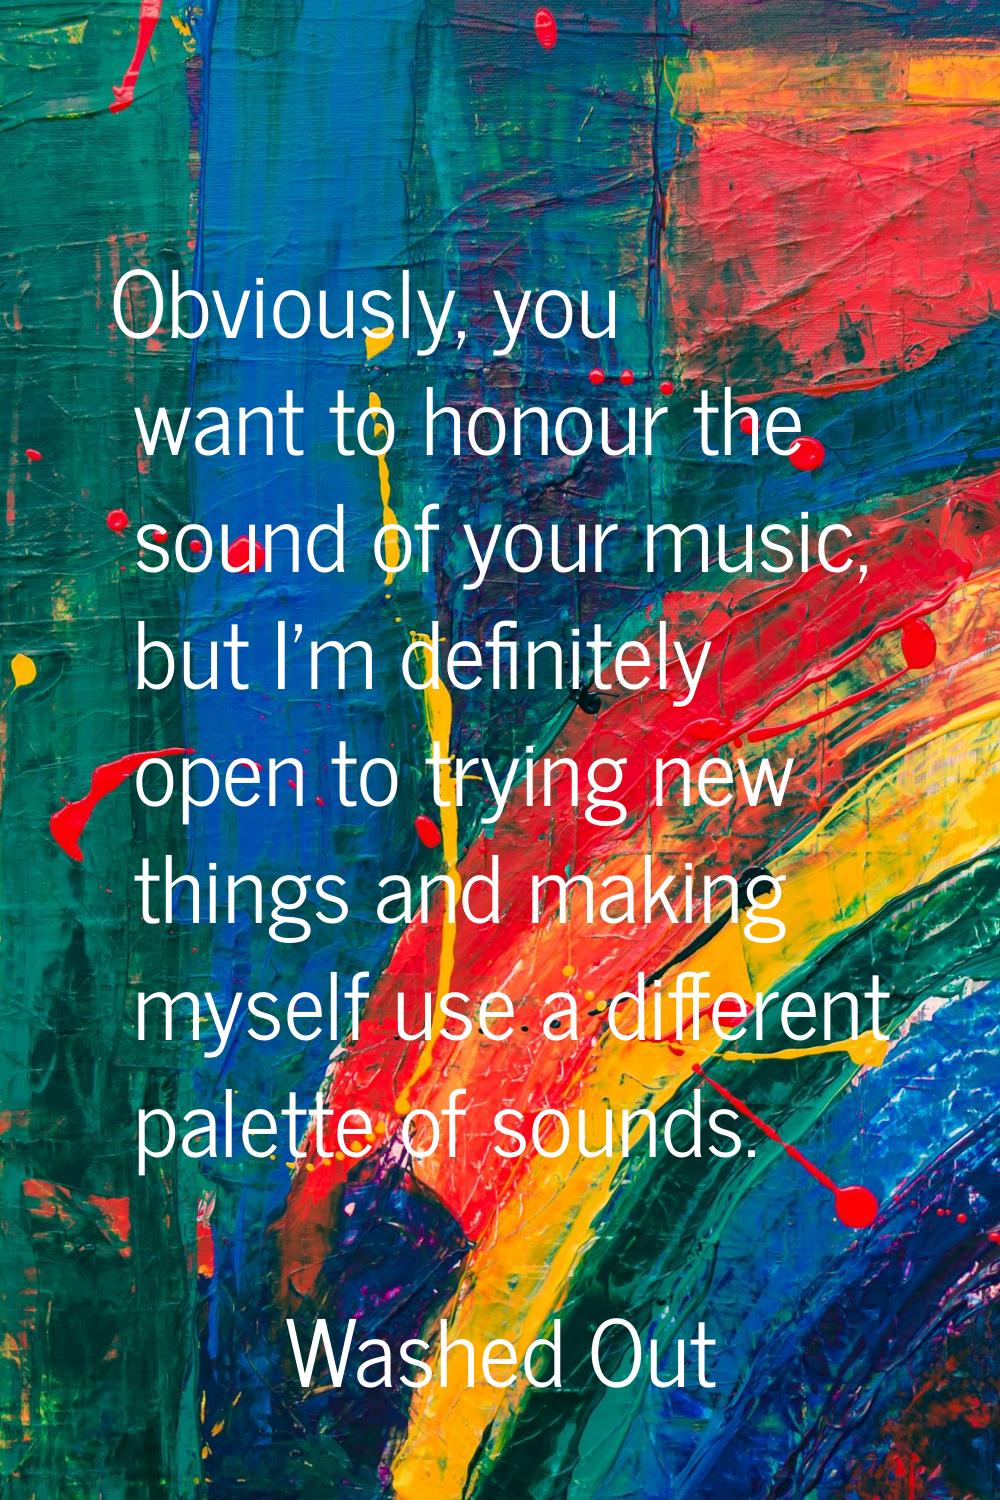 Obviously, you want to honour the sound of your music, but I'm definitely open to trying new things